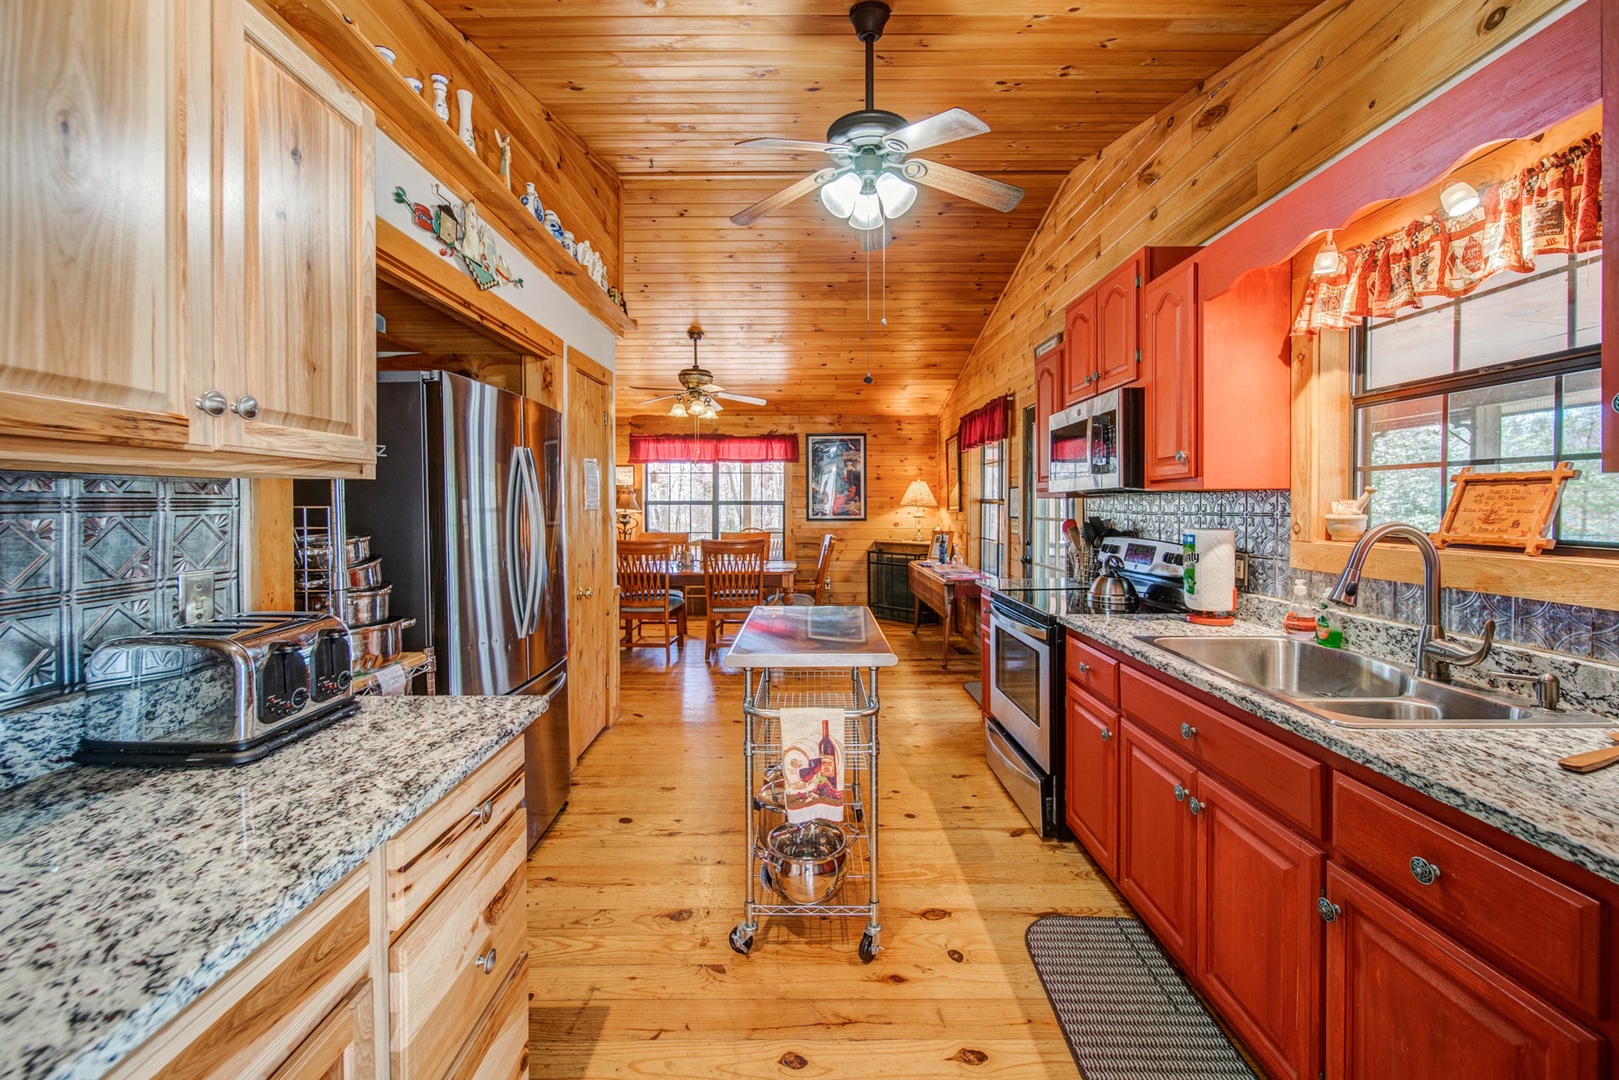 Prepare a family meal or a quaint dinner for 2 in this spacious and well-equipped Kitchen